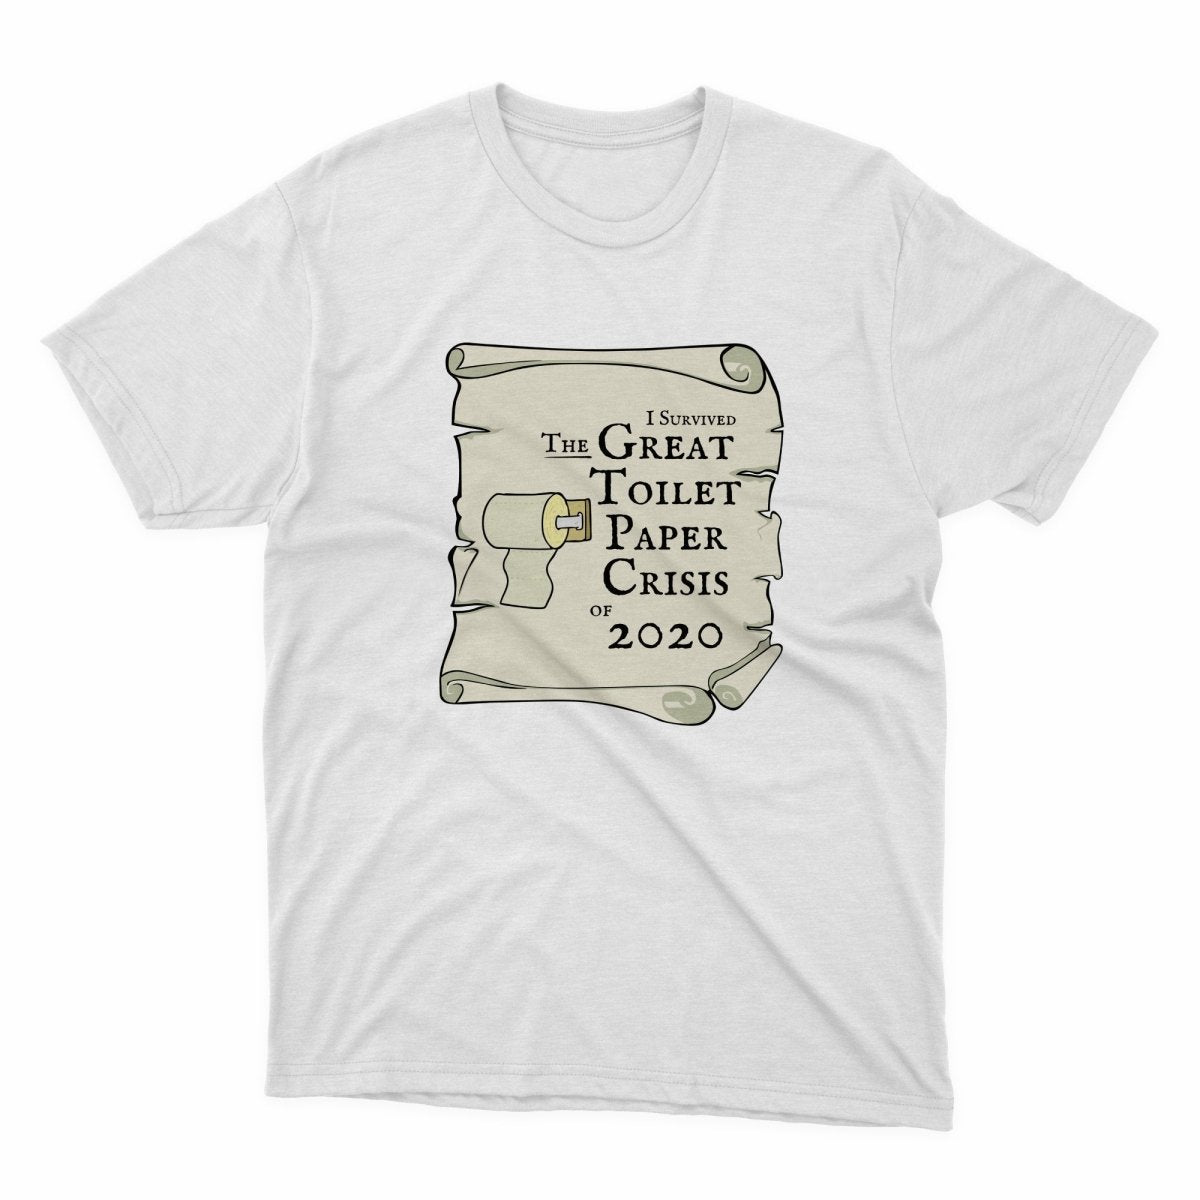 I Survived The Great Toilet Paper Crisis Shirt - stickerbullI Survived The Great Toilet Paper Crisis ShirtShirtsPrintifystickerbull30755630618056111305WhiteSa white t - shirt with the words the great toilet paper crisis on it